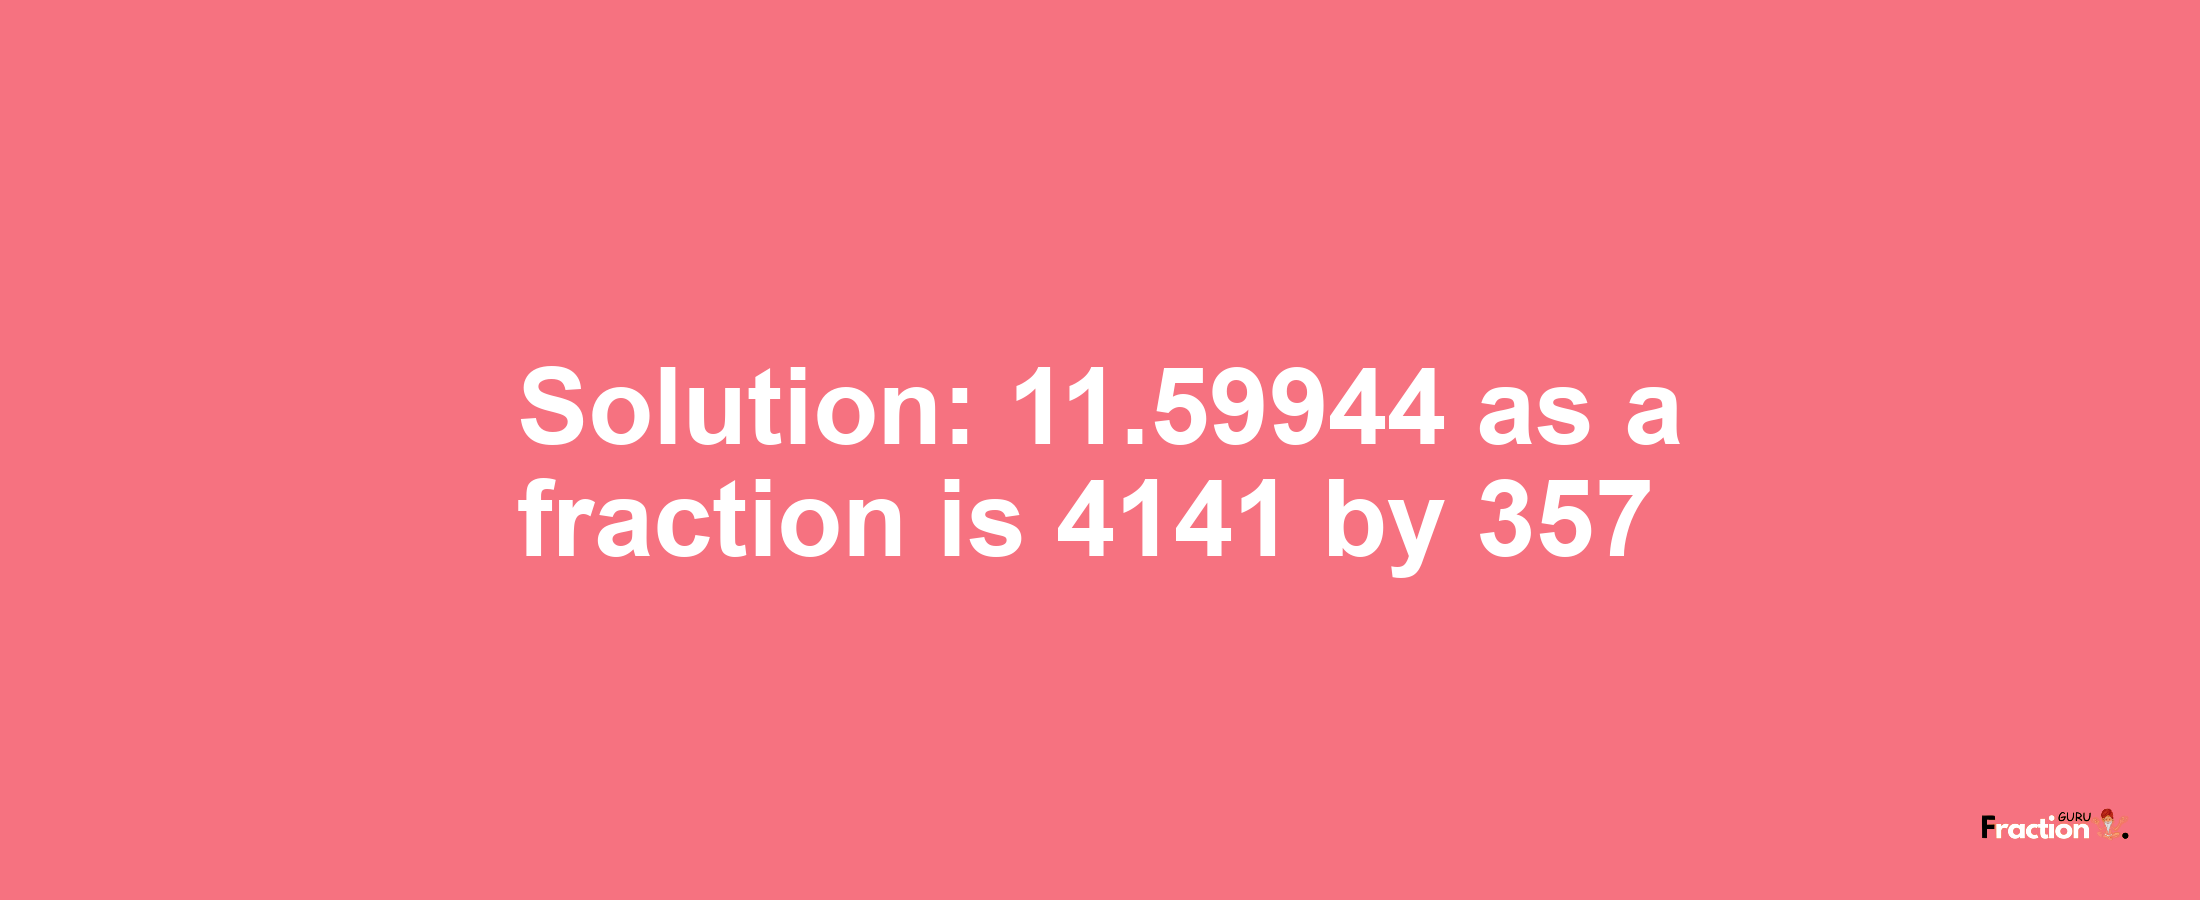 Solution:11.59944 as a fraction is 4141/357